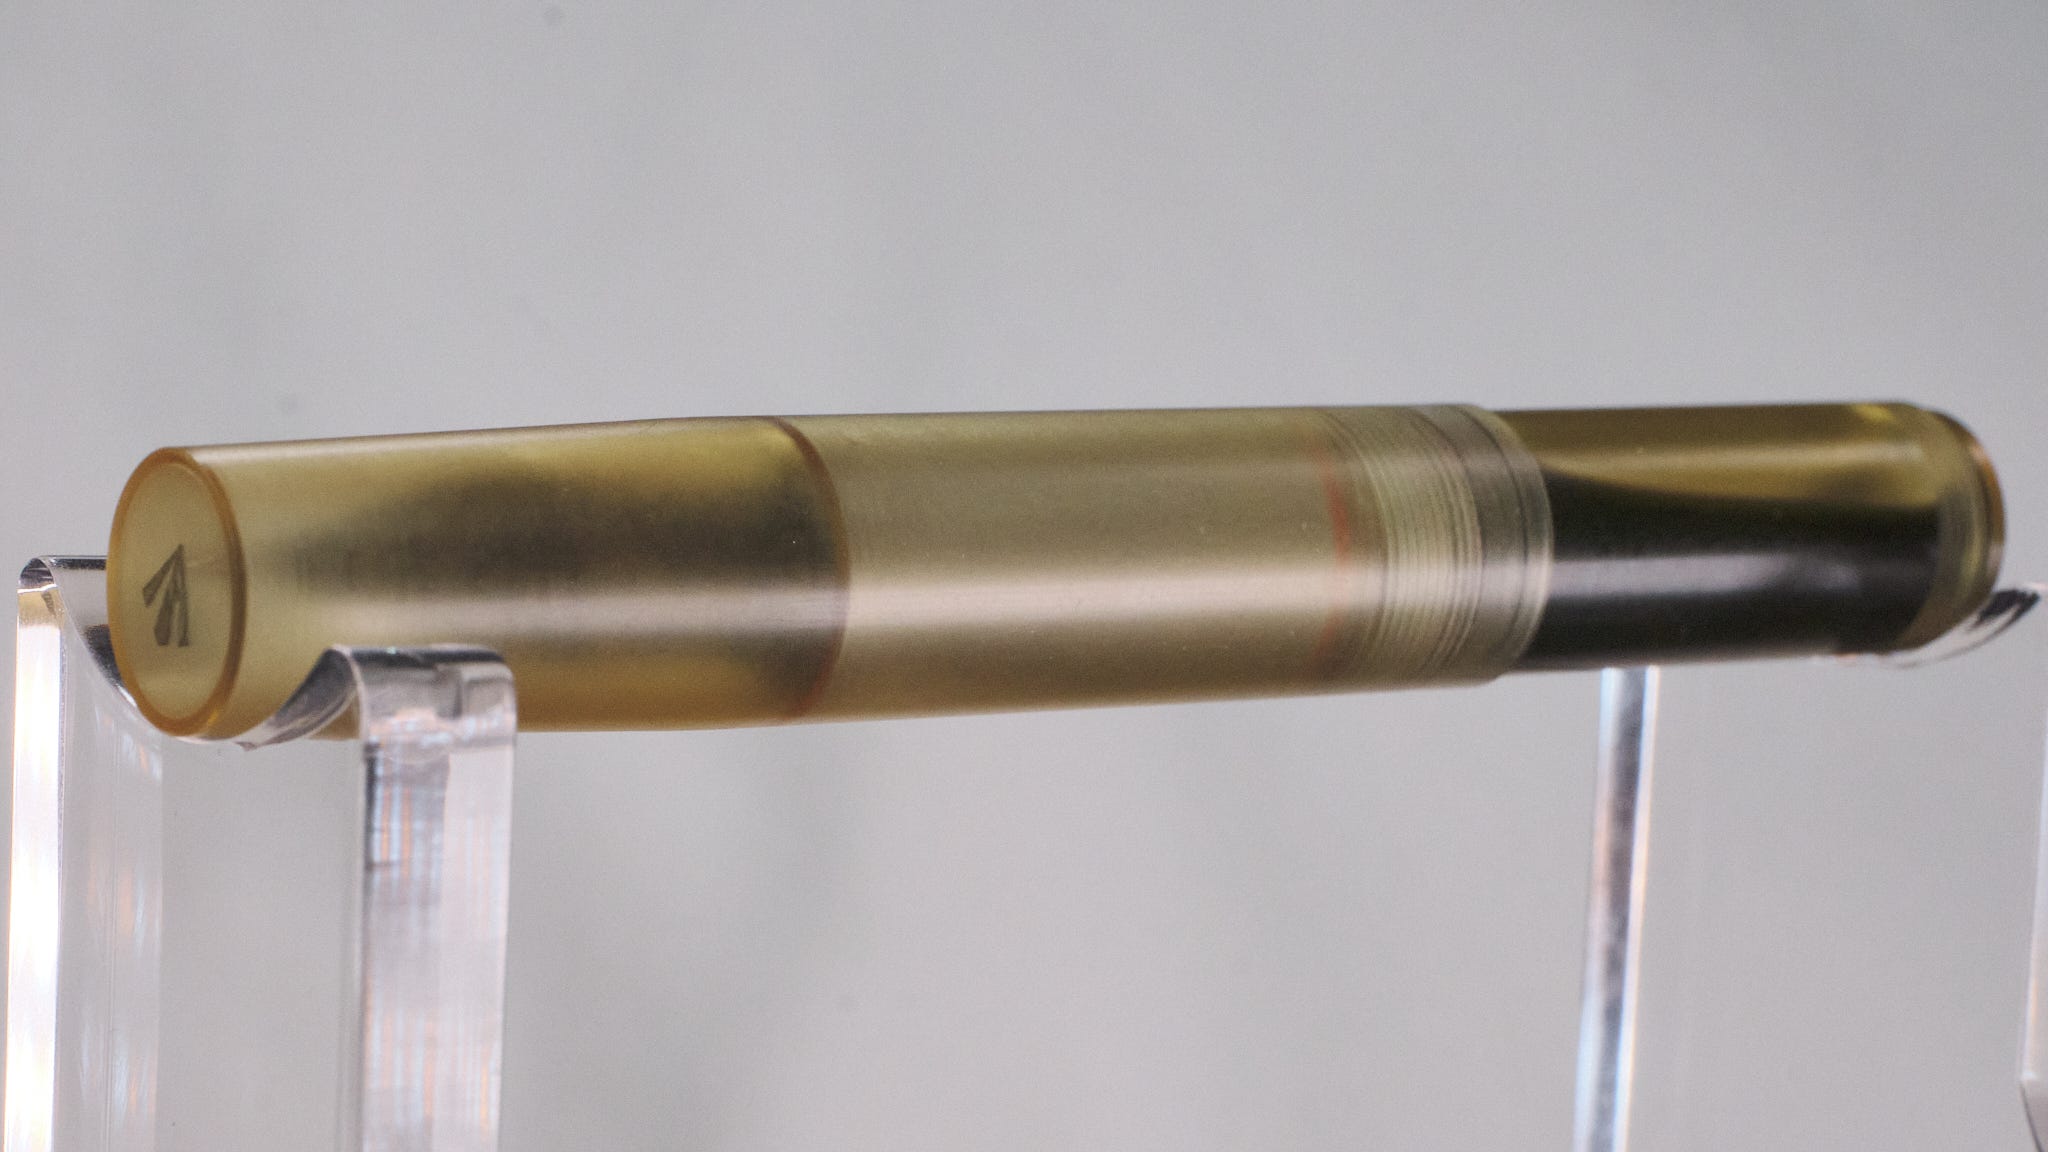 Photo showing a small, semi-transparent yellow fountain pen made from Ultem.